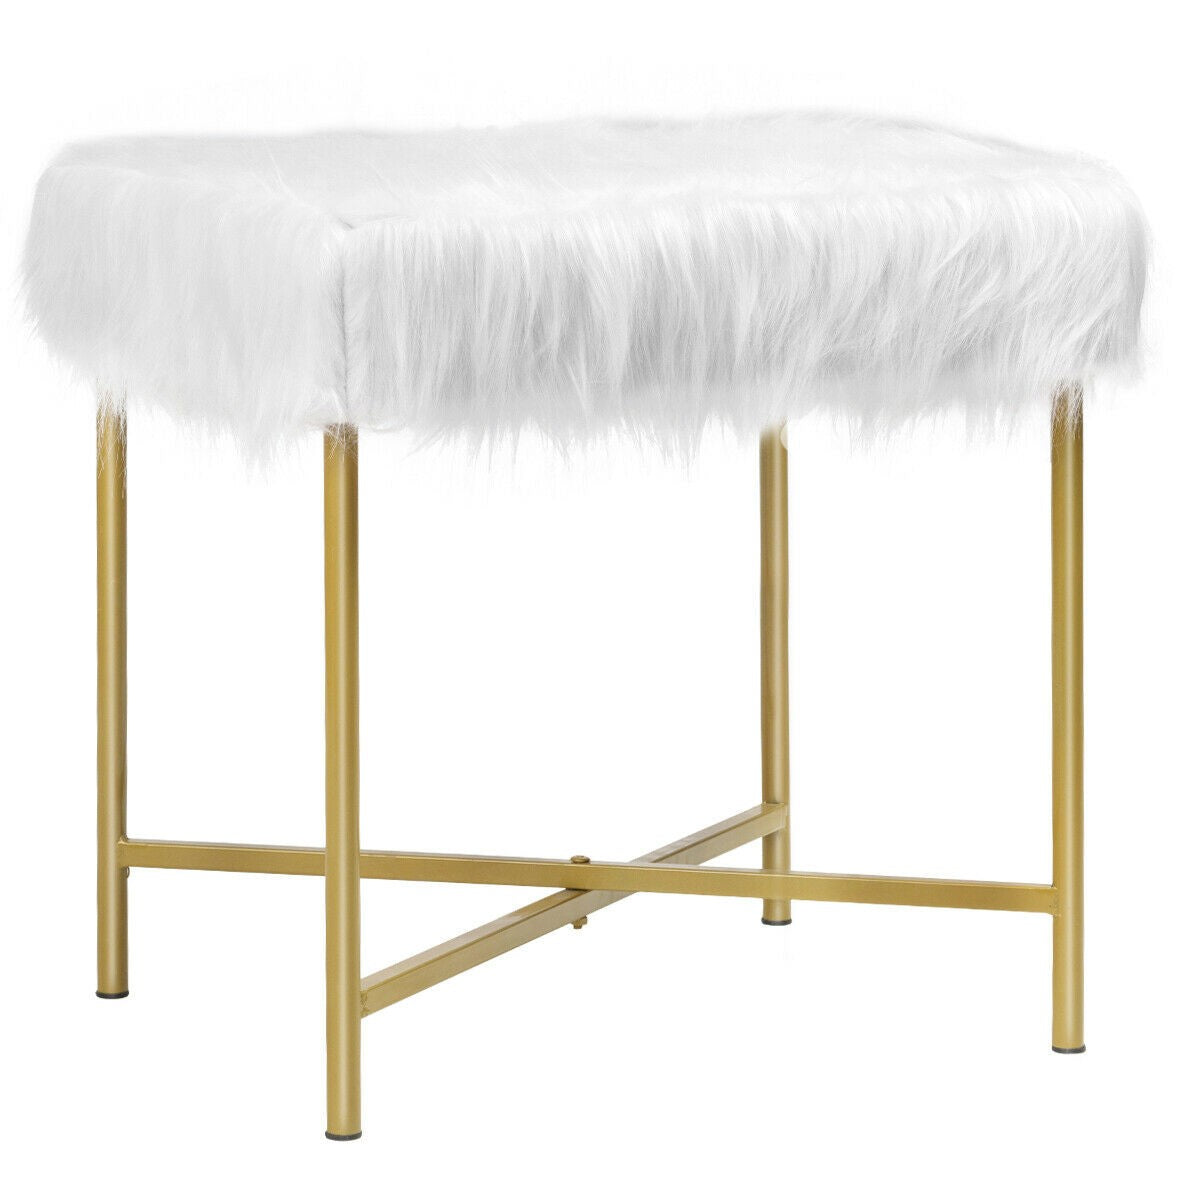 Ottoman Footrest W/ Padded,Luxurious Faux Fur Covered Seat